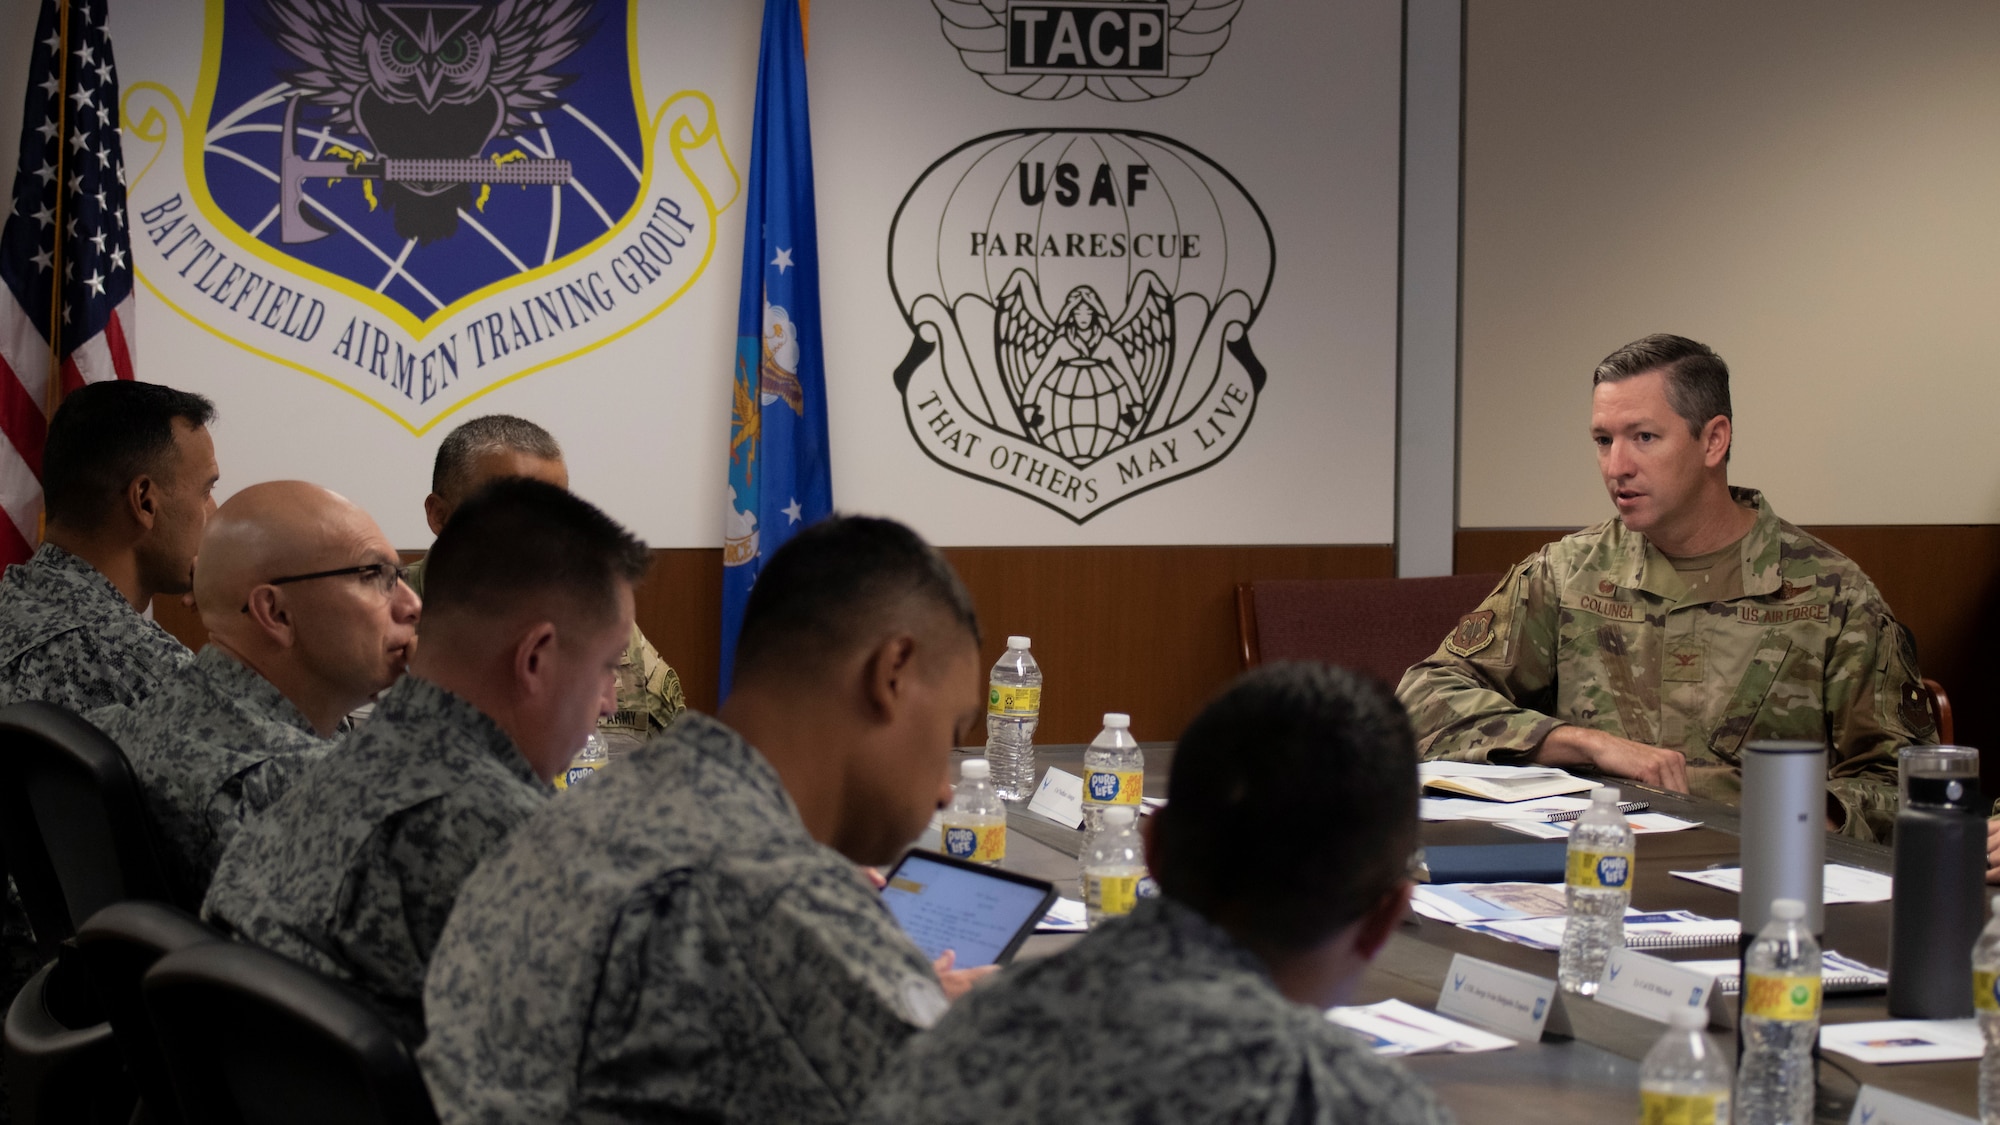 U.S. Air Force Col. Nathan Colunga (right), Special Warfare Training Wing commander, briefs a delegation of Colombian Special Air Commands leaders on the SWTW at Joint Base San Antonio-Chapman Training Annex, Texas, July. 25, 2022. The delegation visited the Special Warfare Training Wing for an immersion into the various Air Force Special Warfare career fields and pipelines.